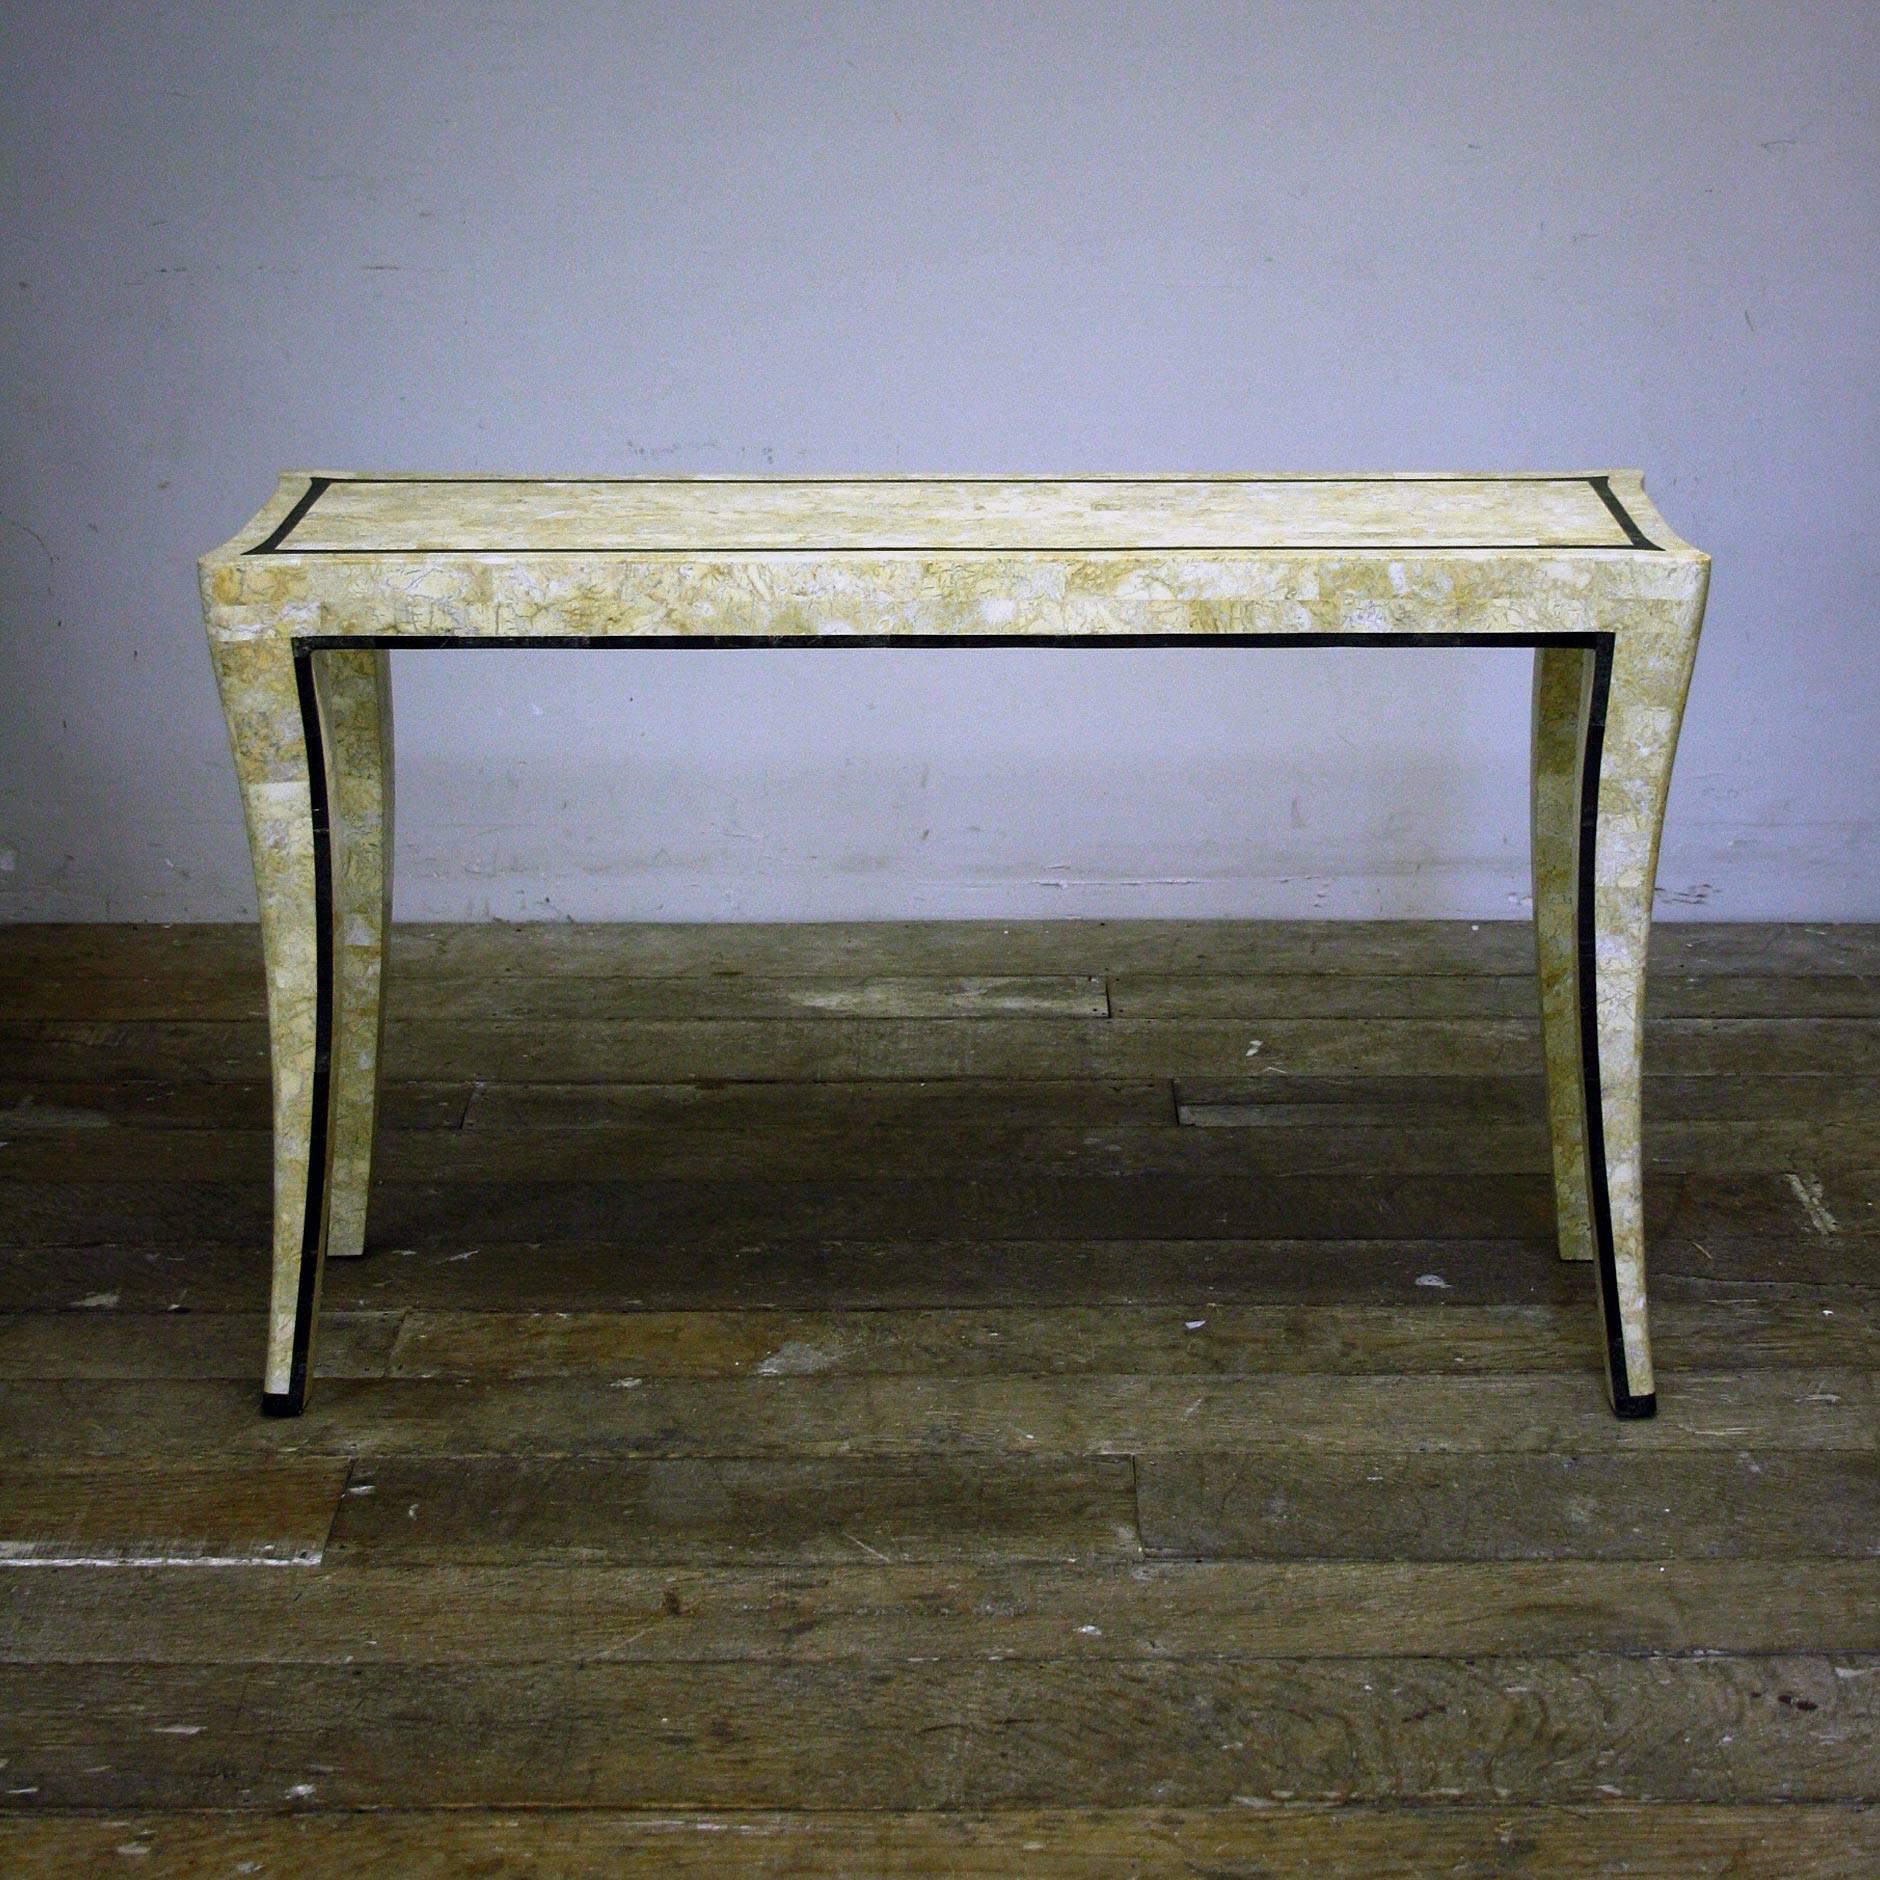 A stunning console table by Maitland and Smith with polished tesselated marble, a real stunning looking piece.